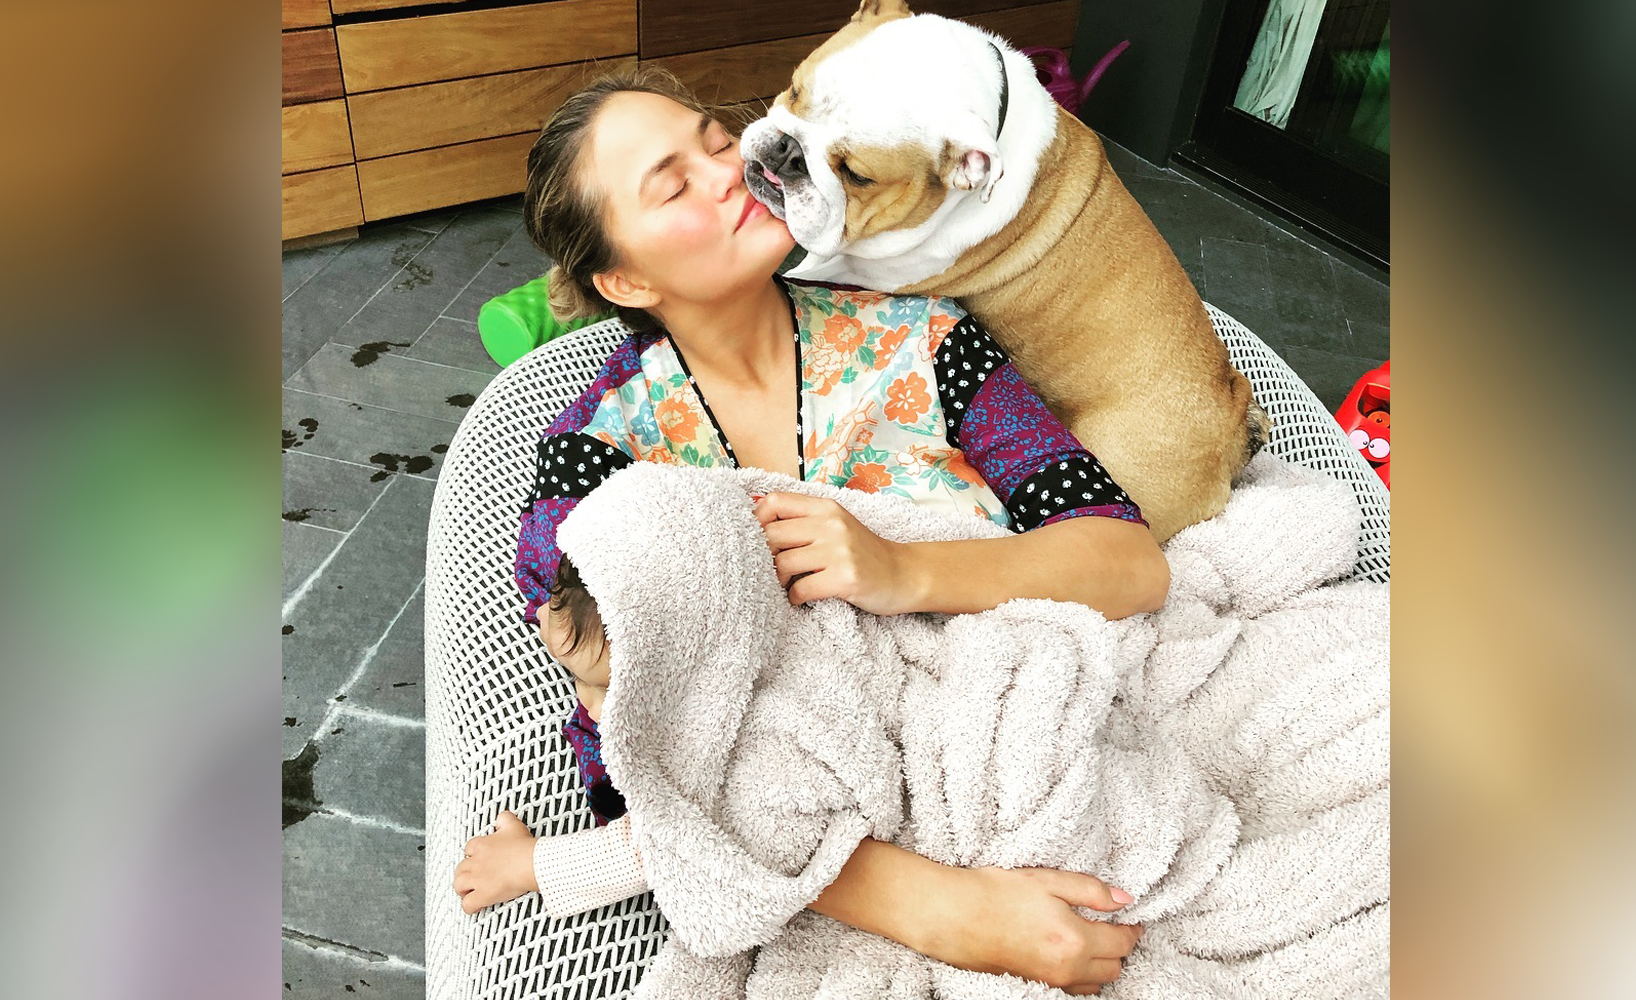 Chrissy Teigen and I Both Use Barefoot Dreams Blankets: Review